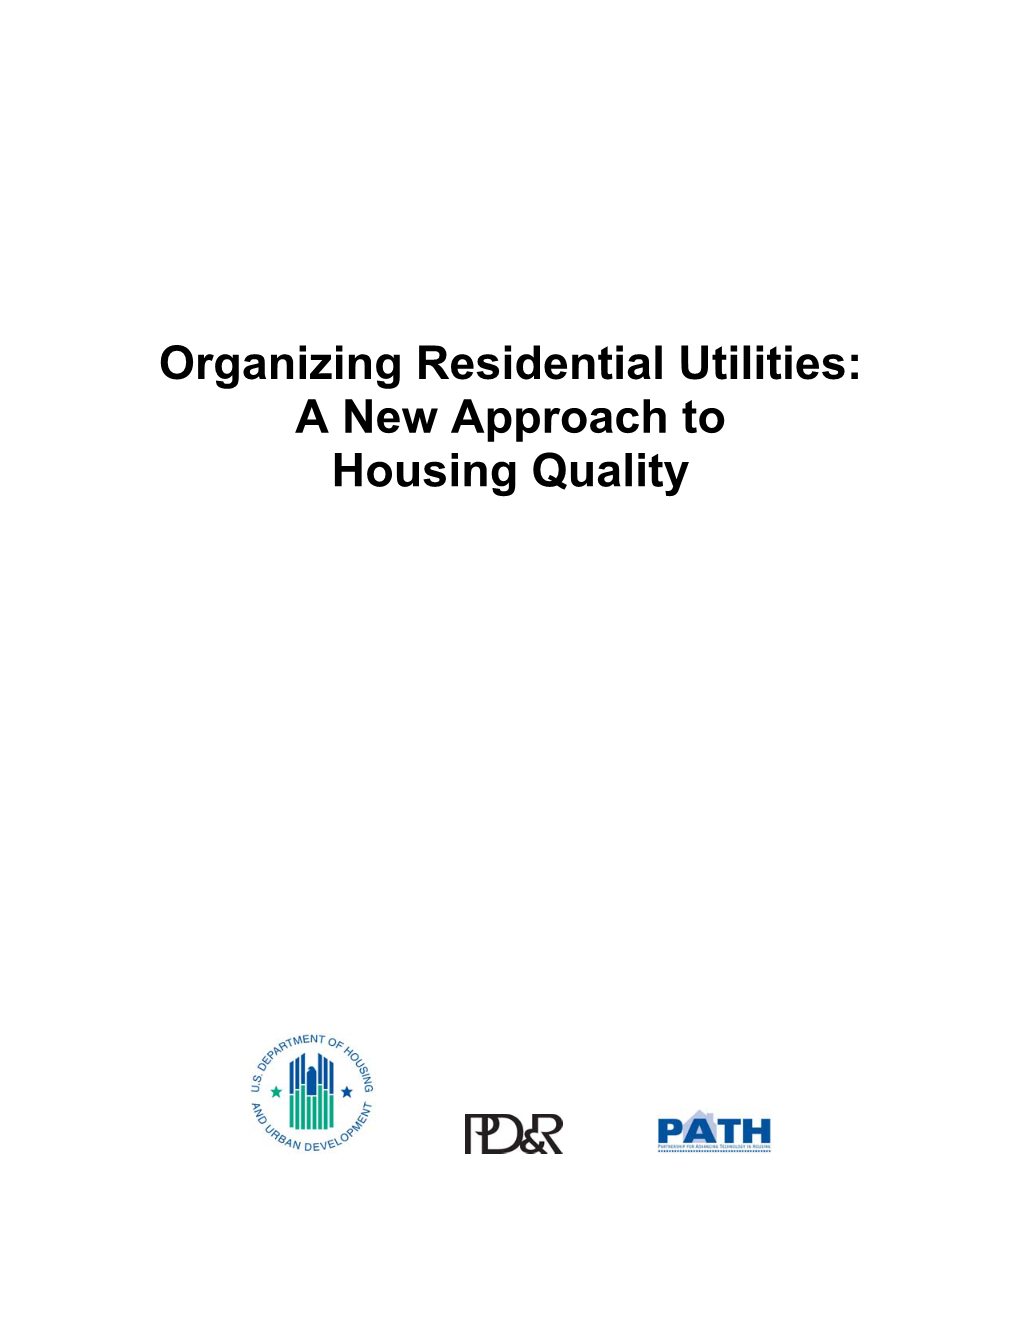 Organizing Residential Utilities: a New Approach to Housing Quality